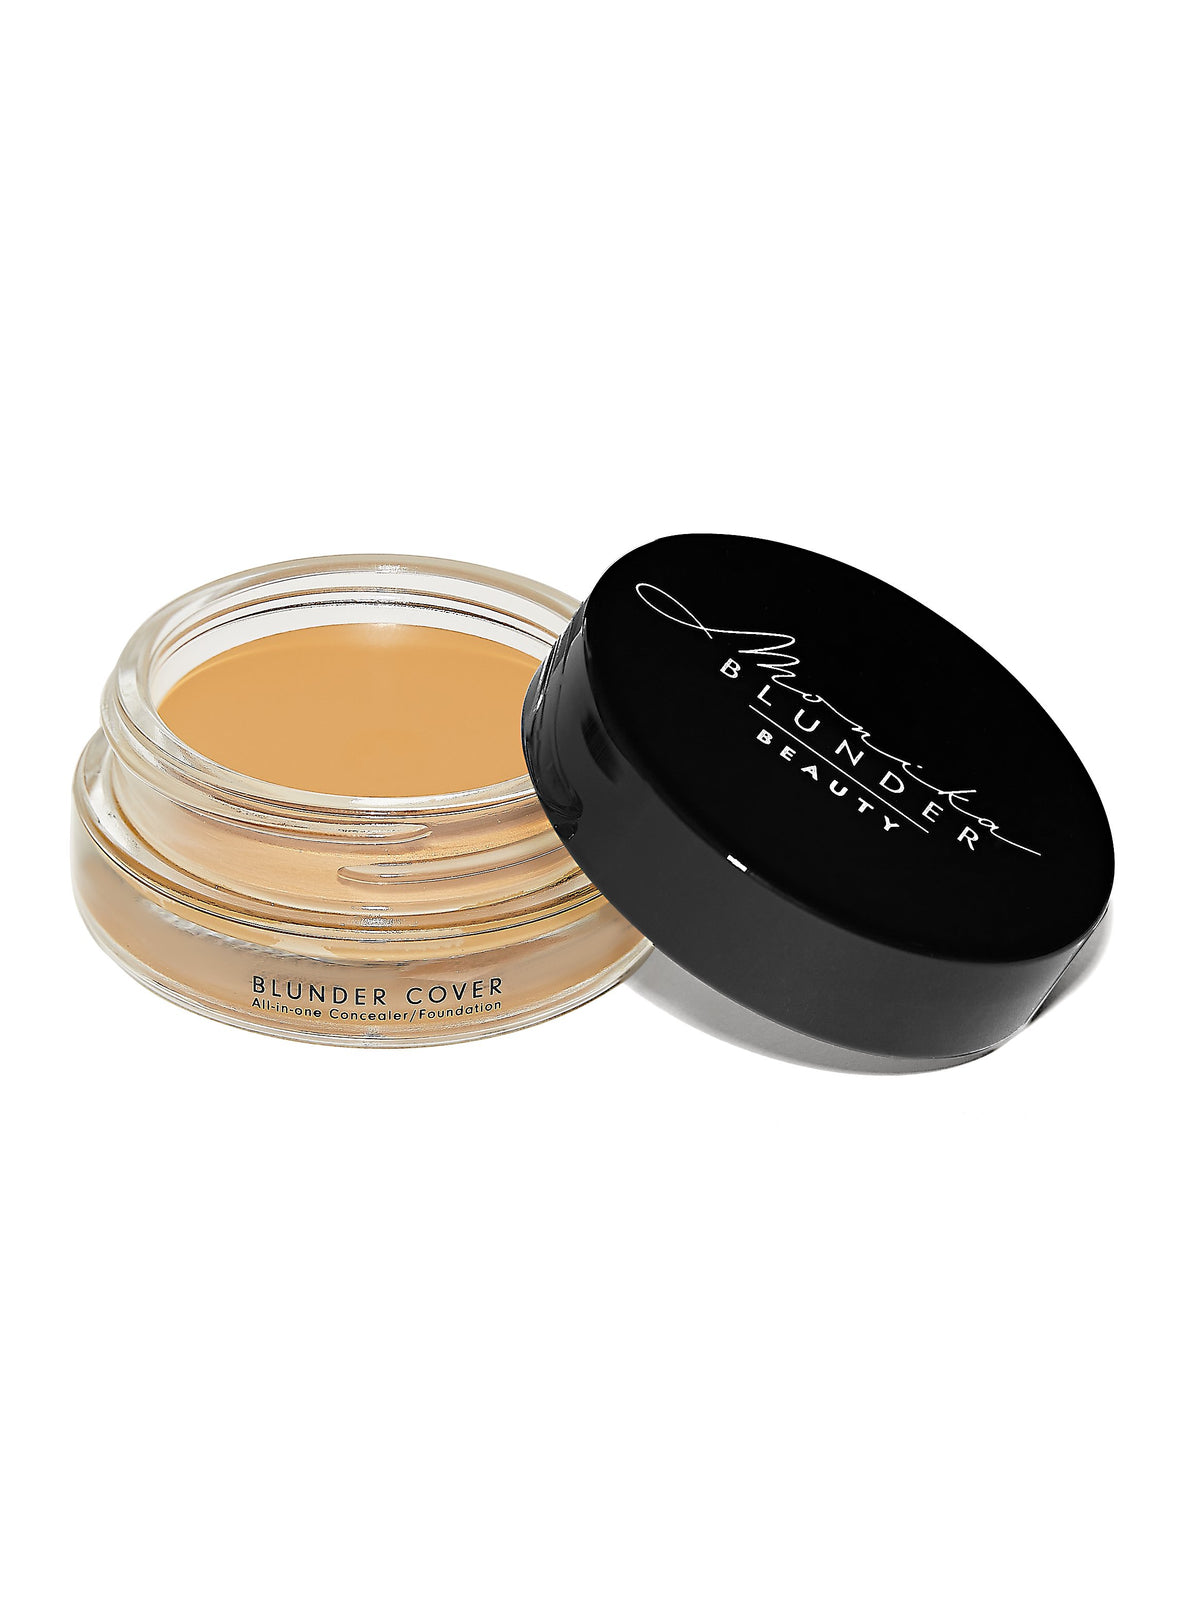 4.5 VIER.5 Blunder Cover All-in-One Concealer/ Foundation